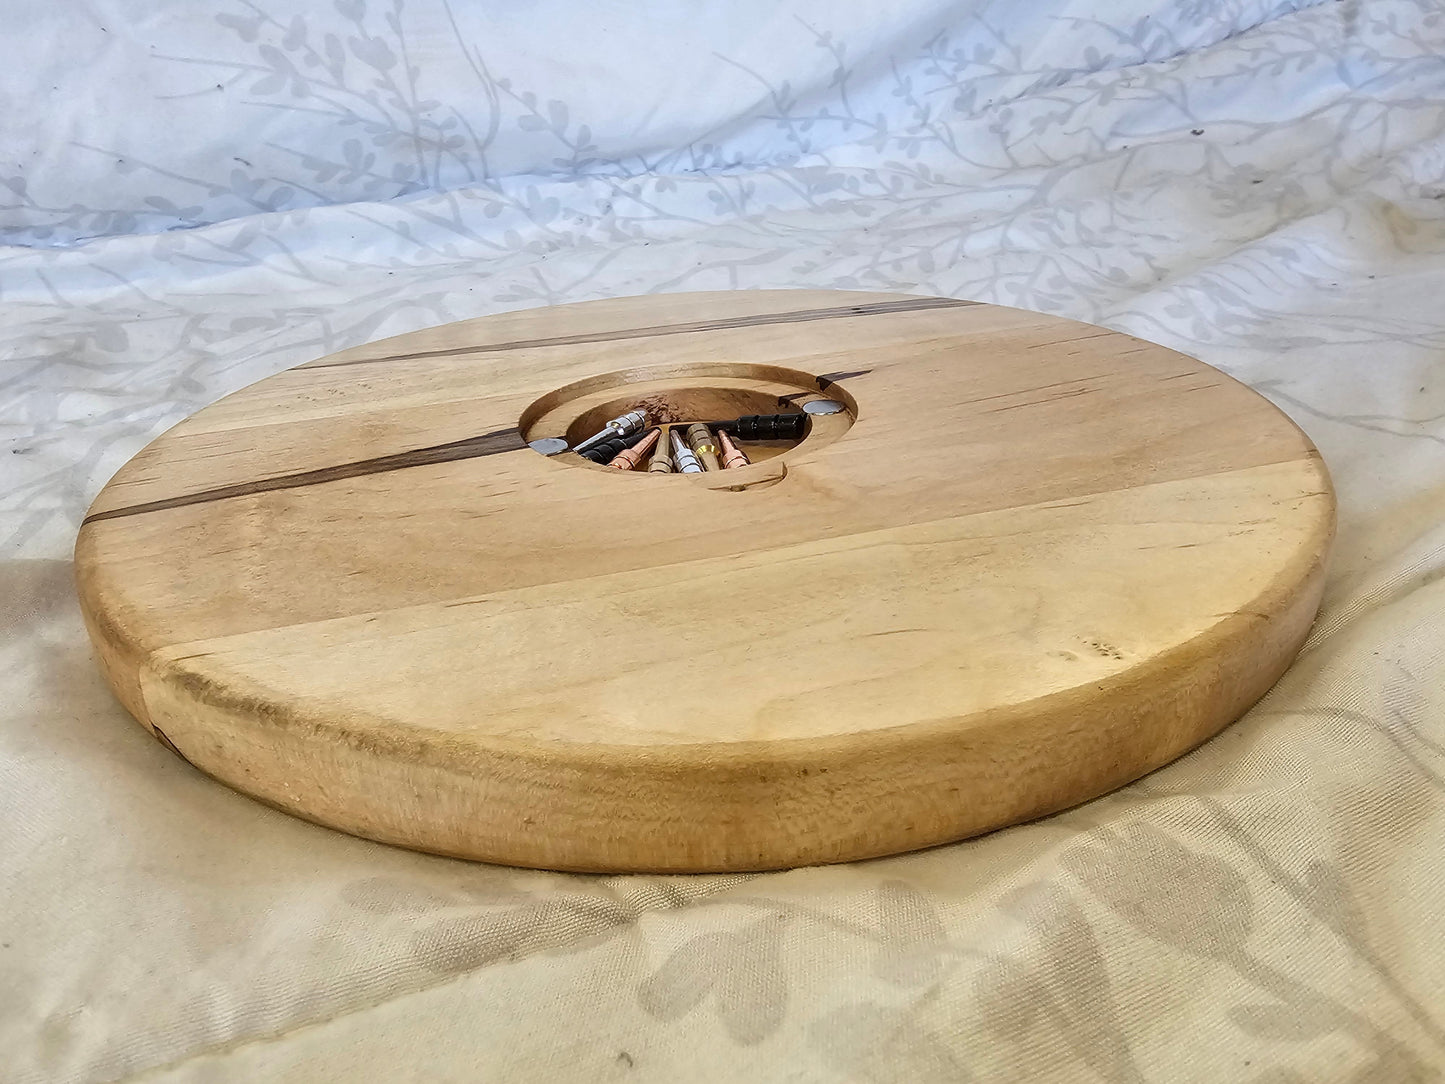 Compass Cribbage board